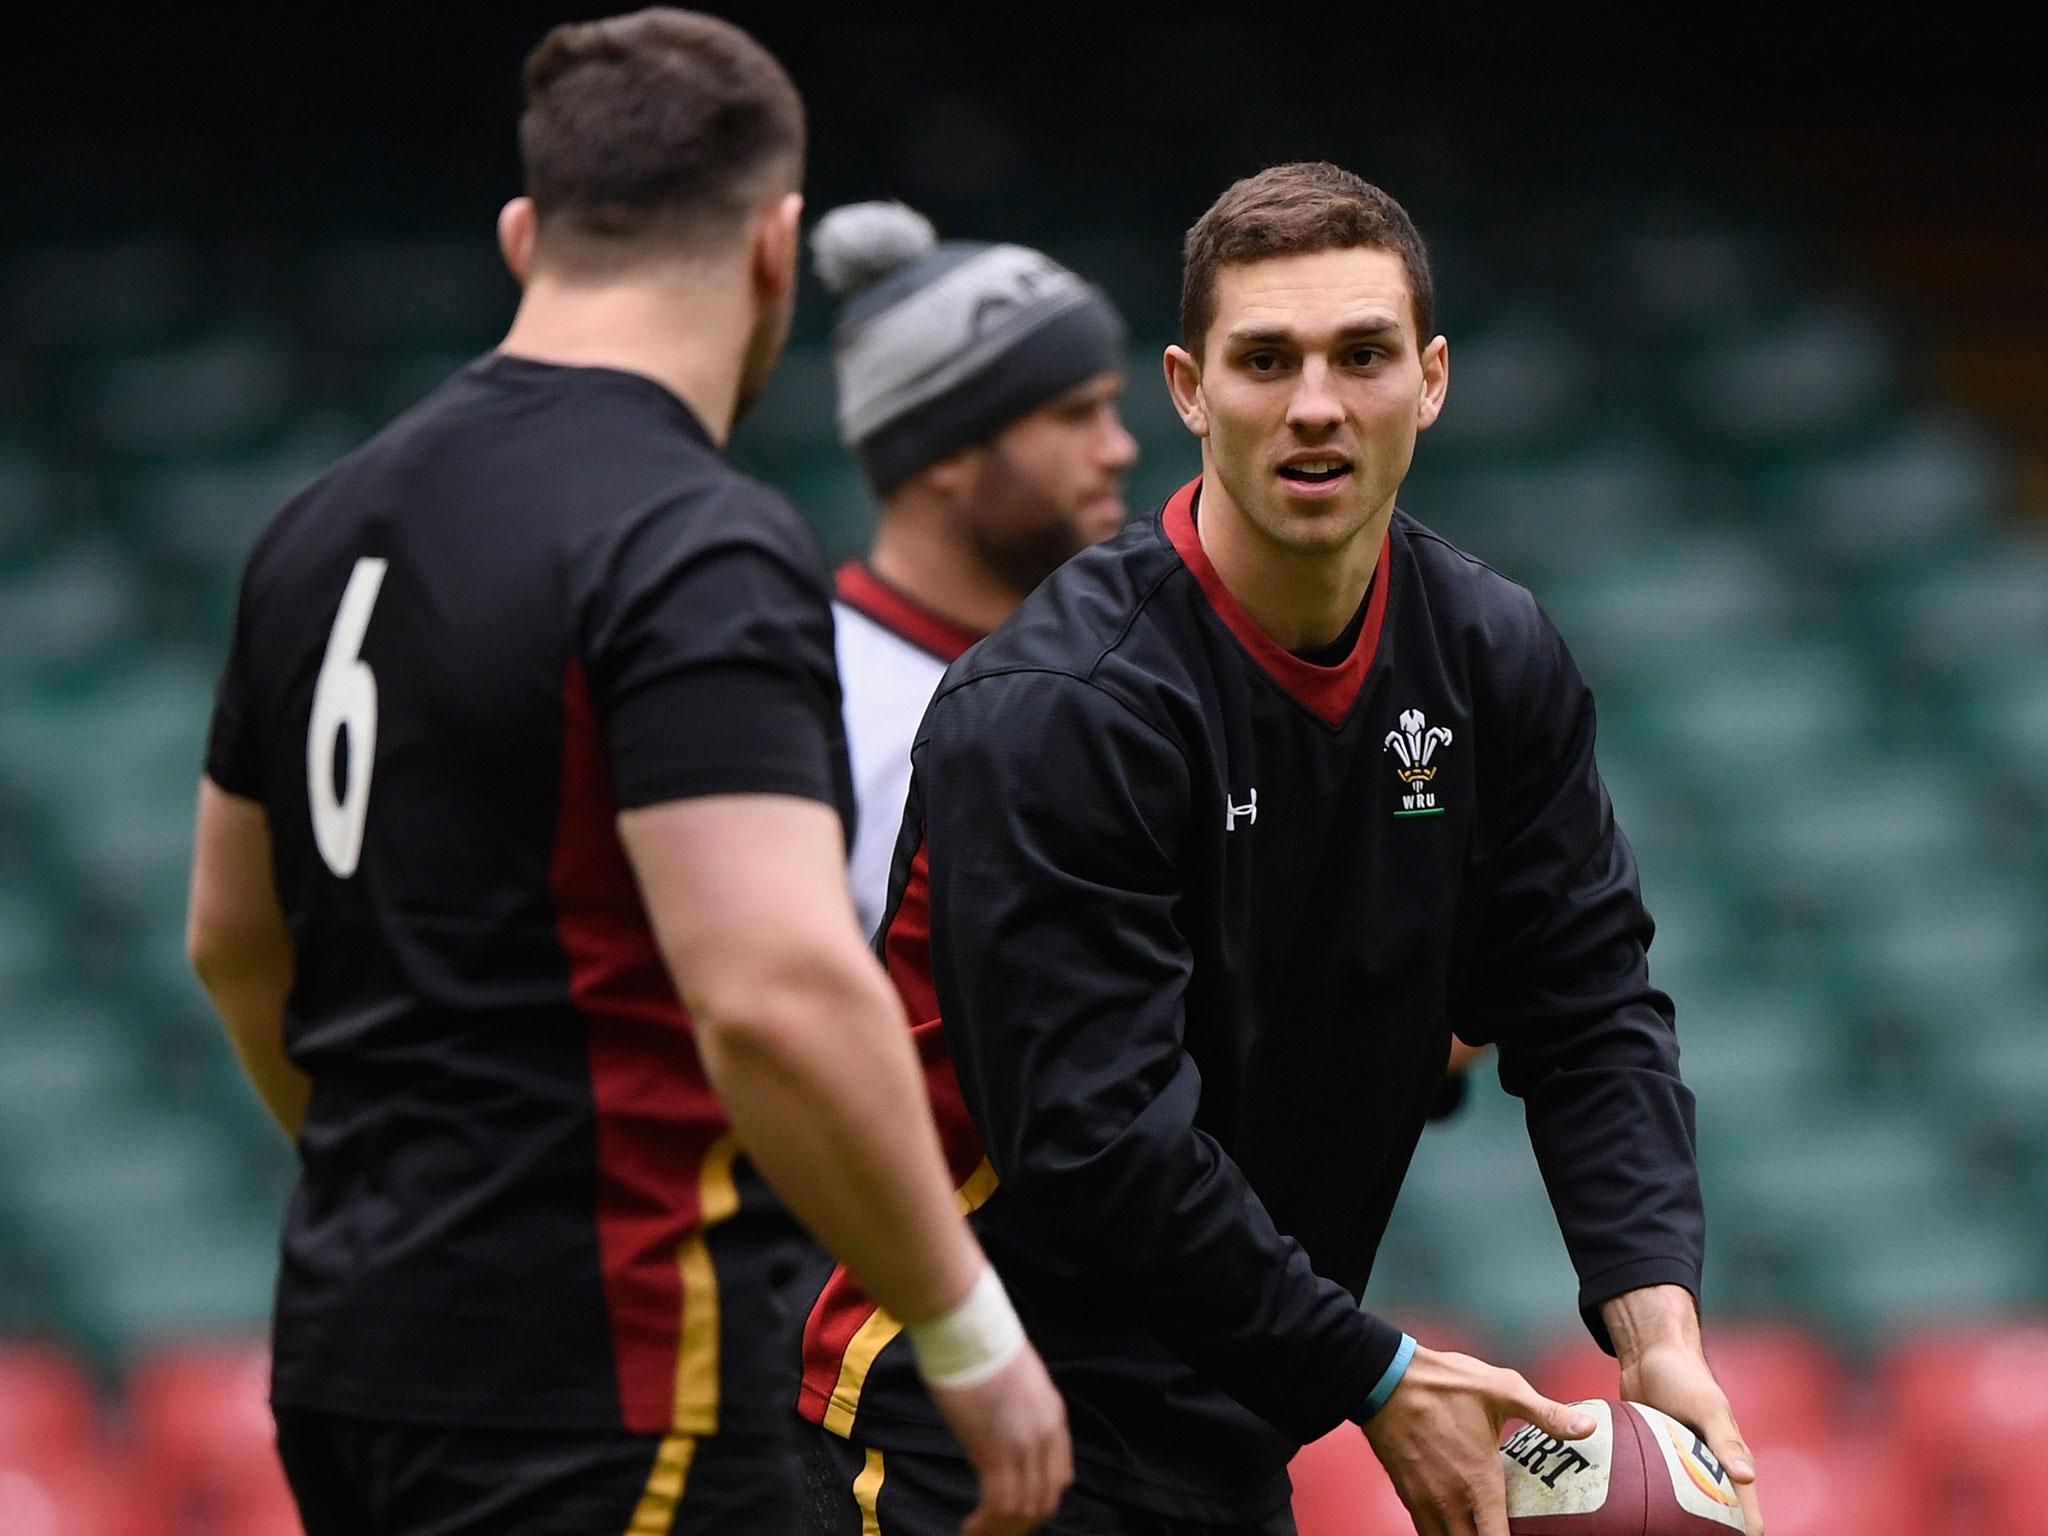 George North will start the Six Nations encounter between Scotland and Wales on Saturday